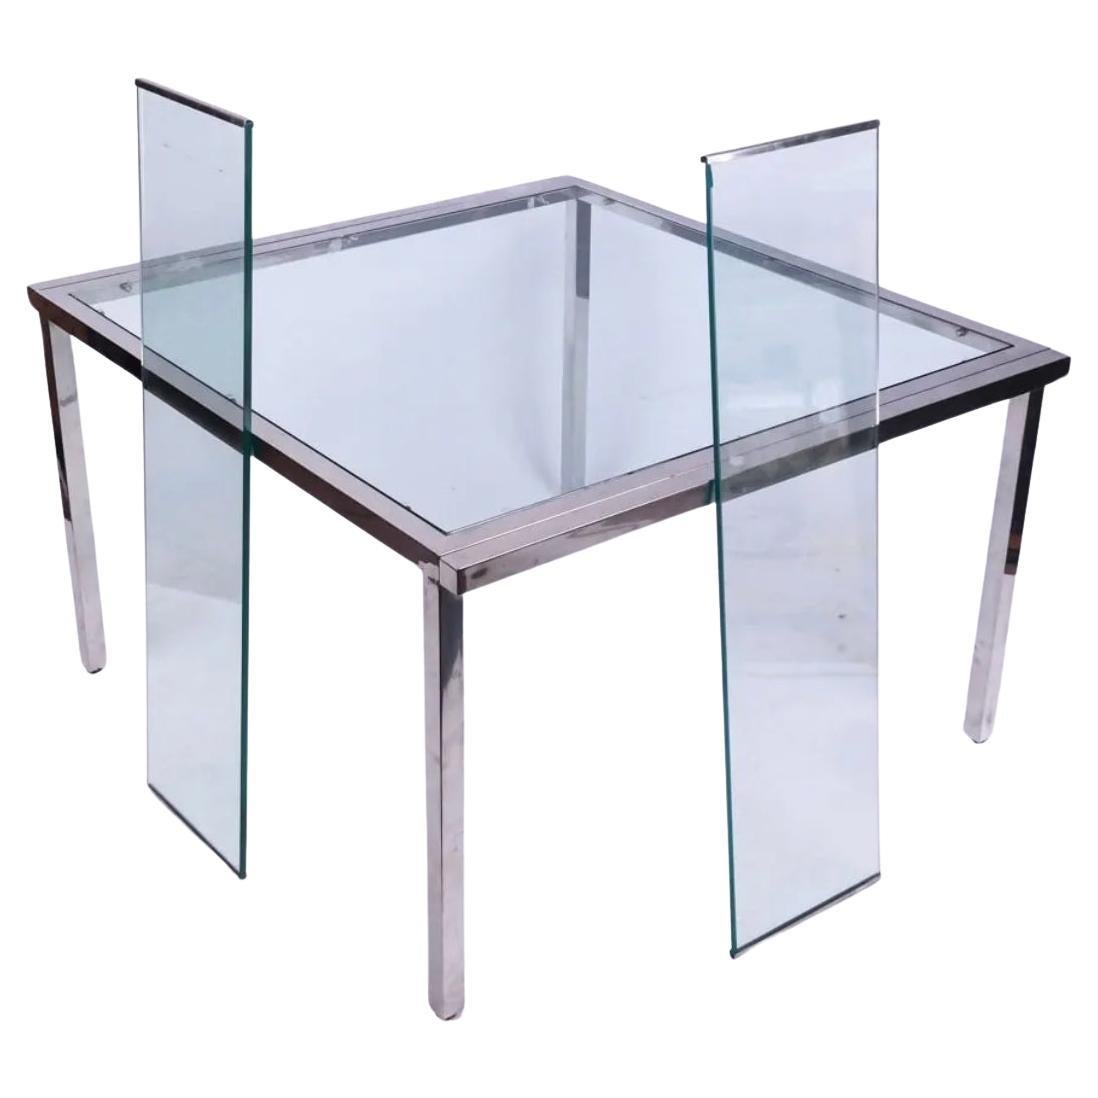 Late 20th Century Post Modern Chrome and Glass dining table with 2 Glass leaves For Sale